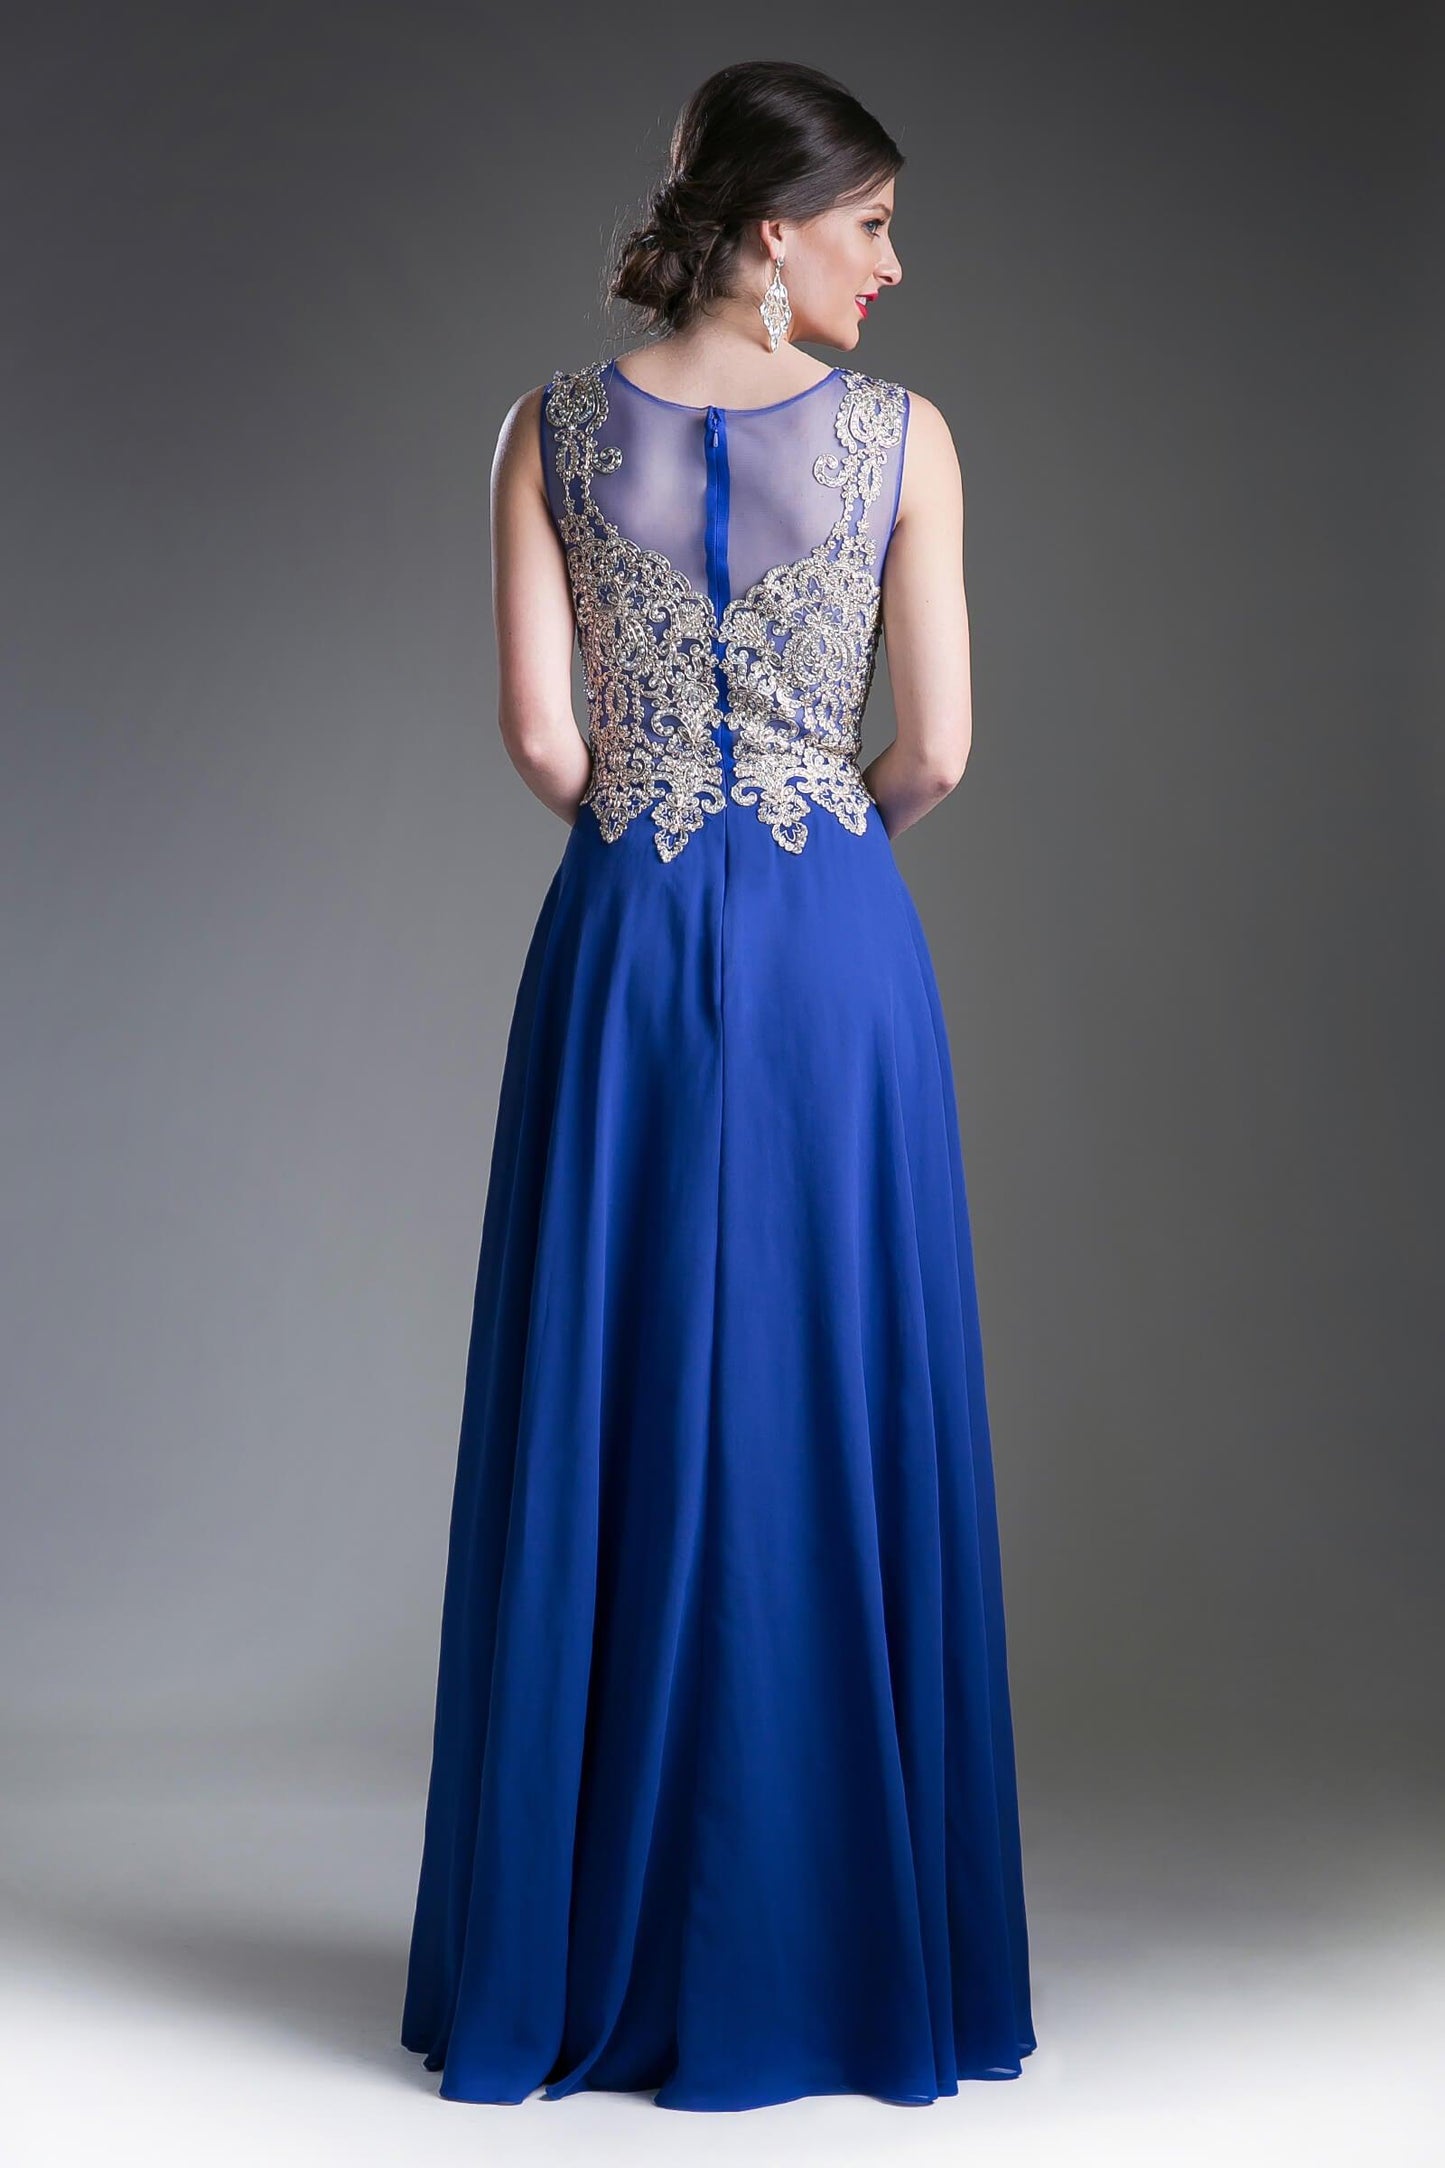 Long Jewel Embellished Formal Prom Gown Royal